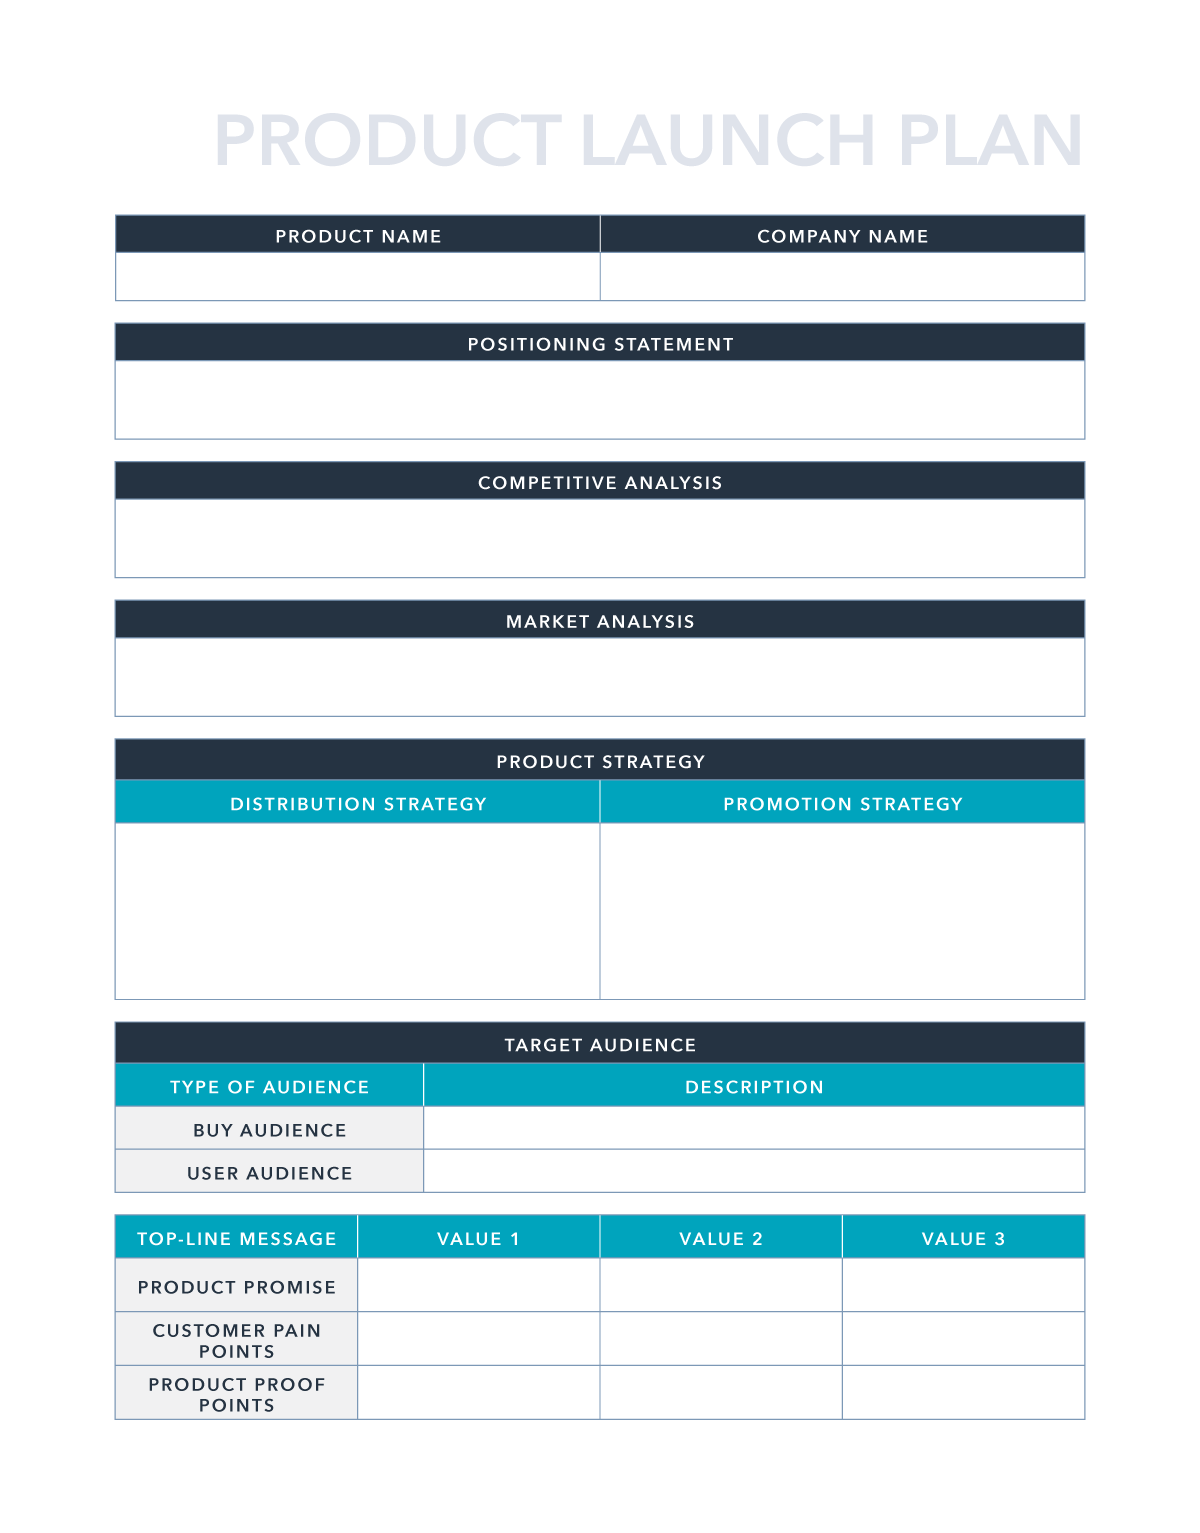 product launch plan with a table format laying out product, positioning, analysis, strategy, and more